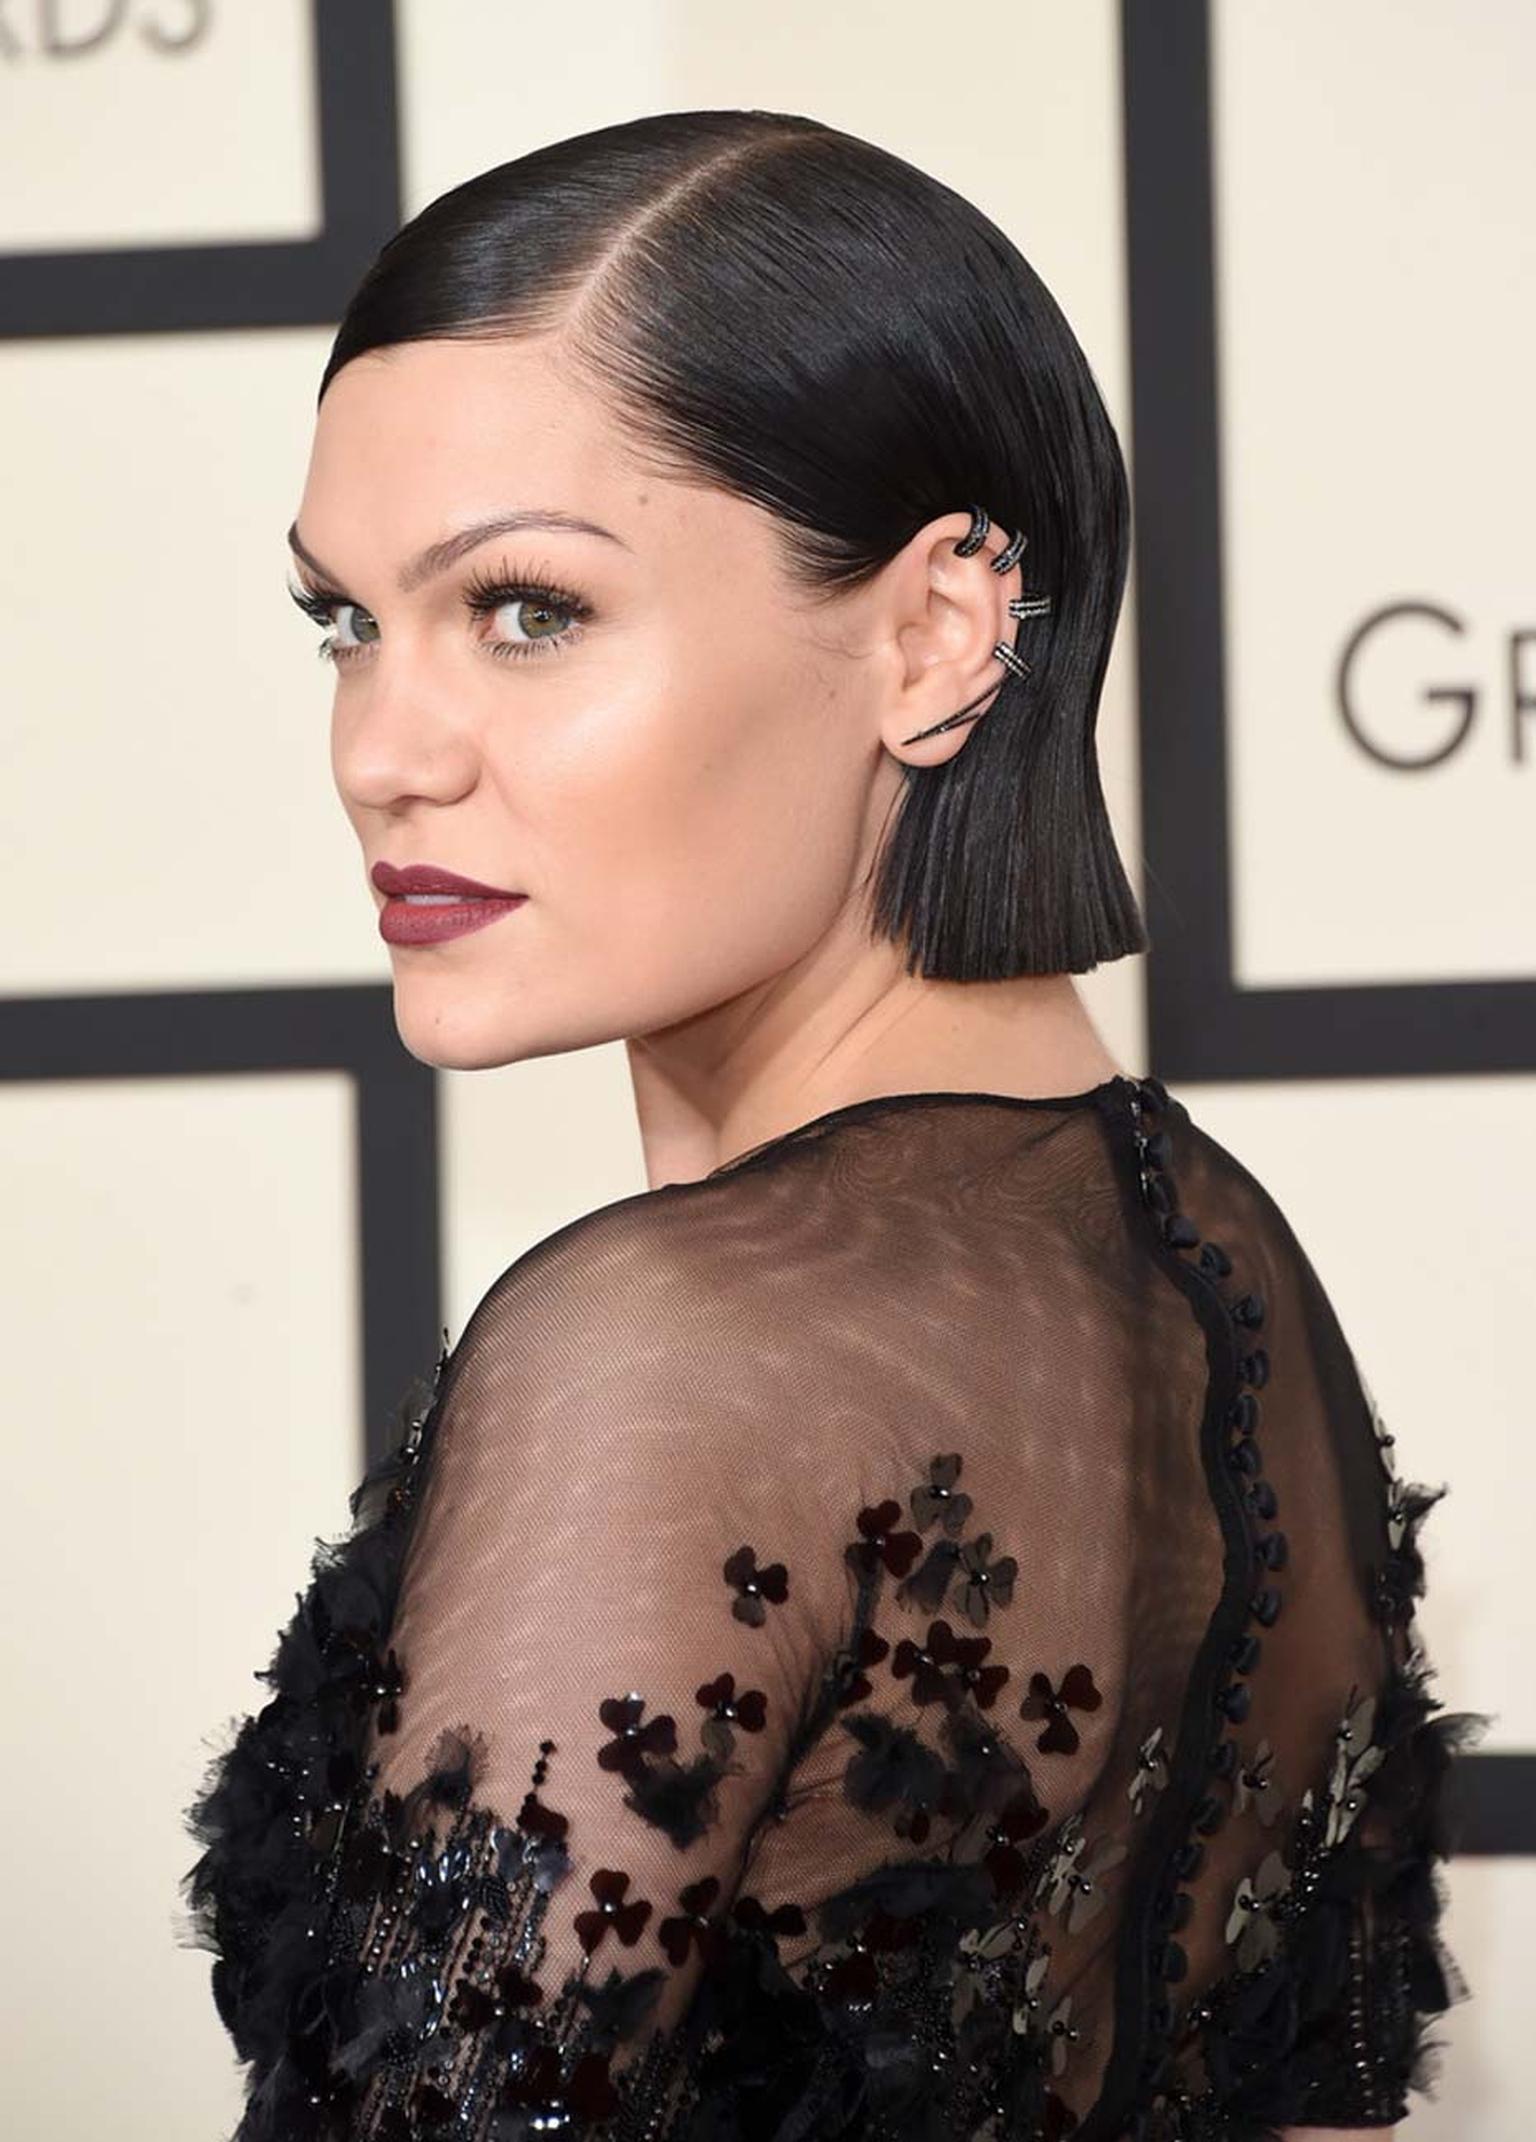 Jessie J's slicked-back hair showed off her Sutra black gold and diamond ear cuff perfectly.